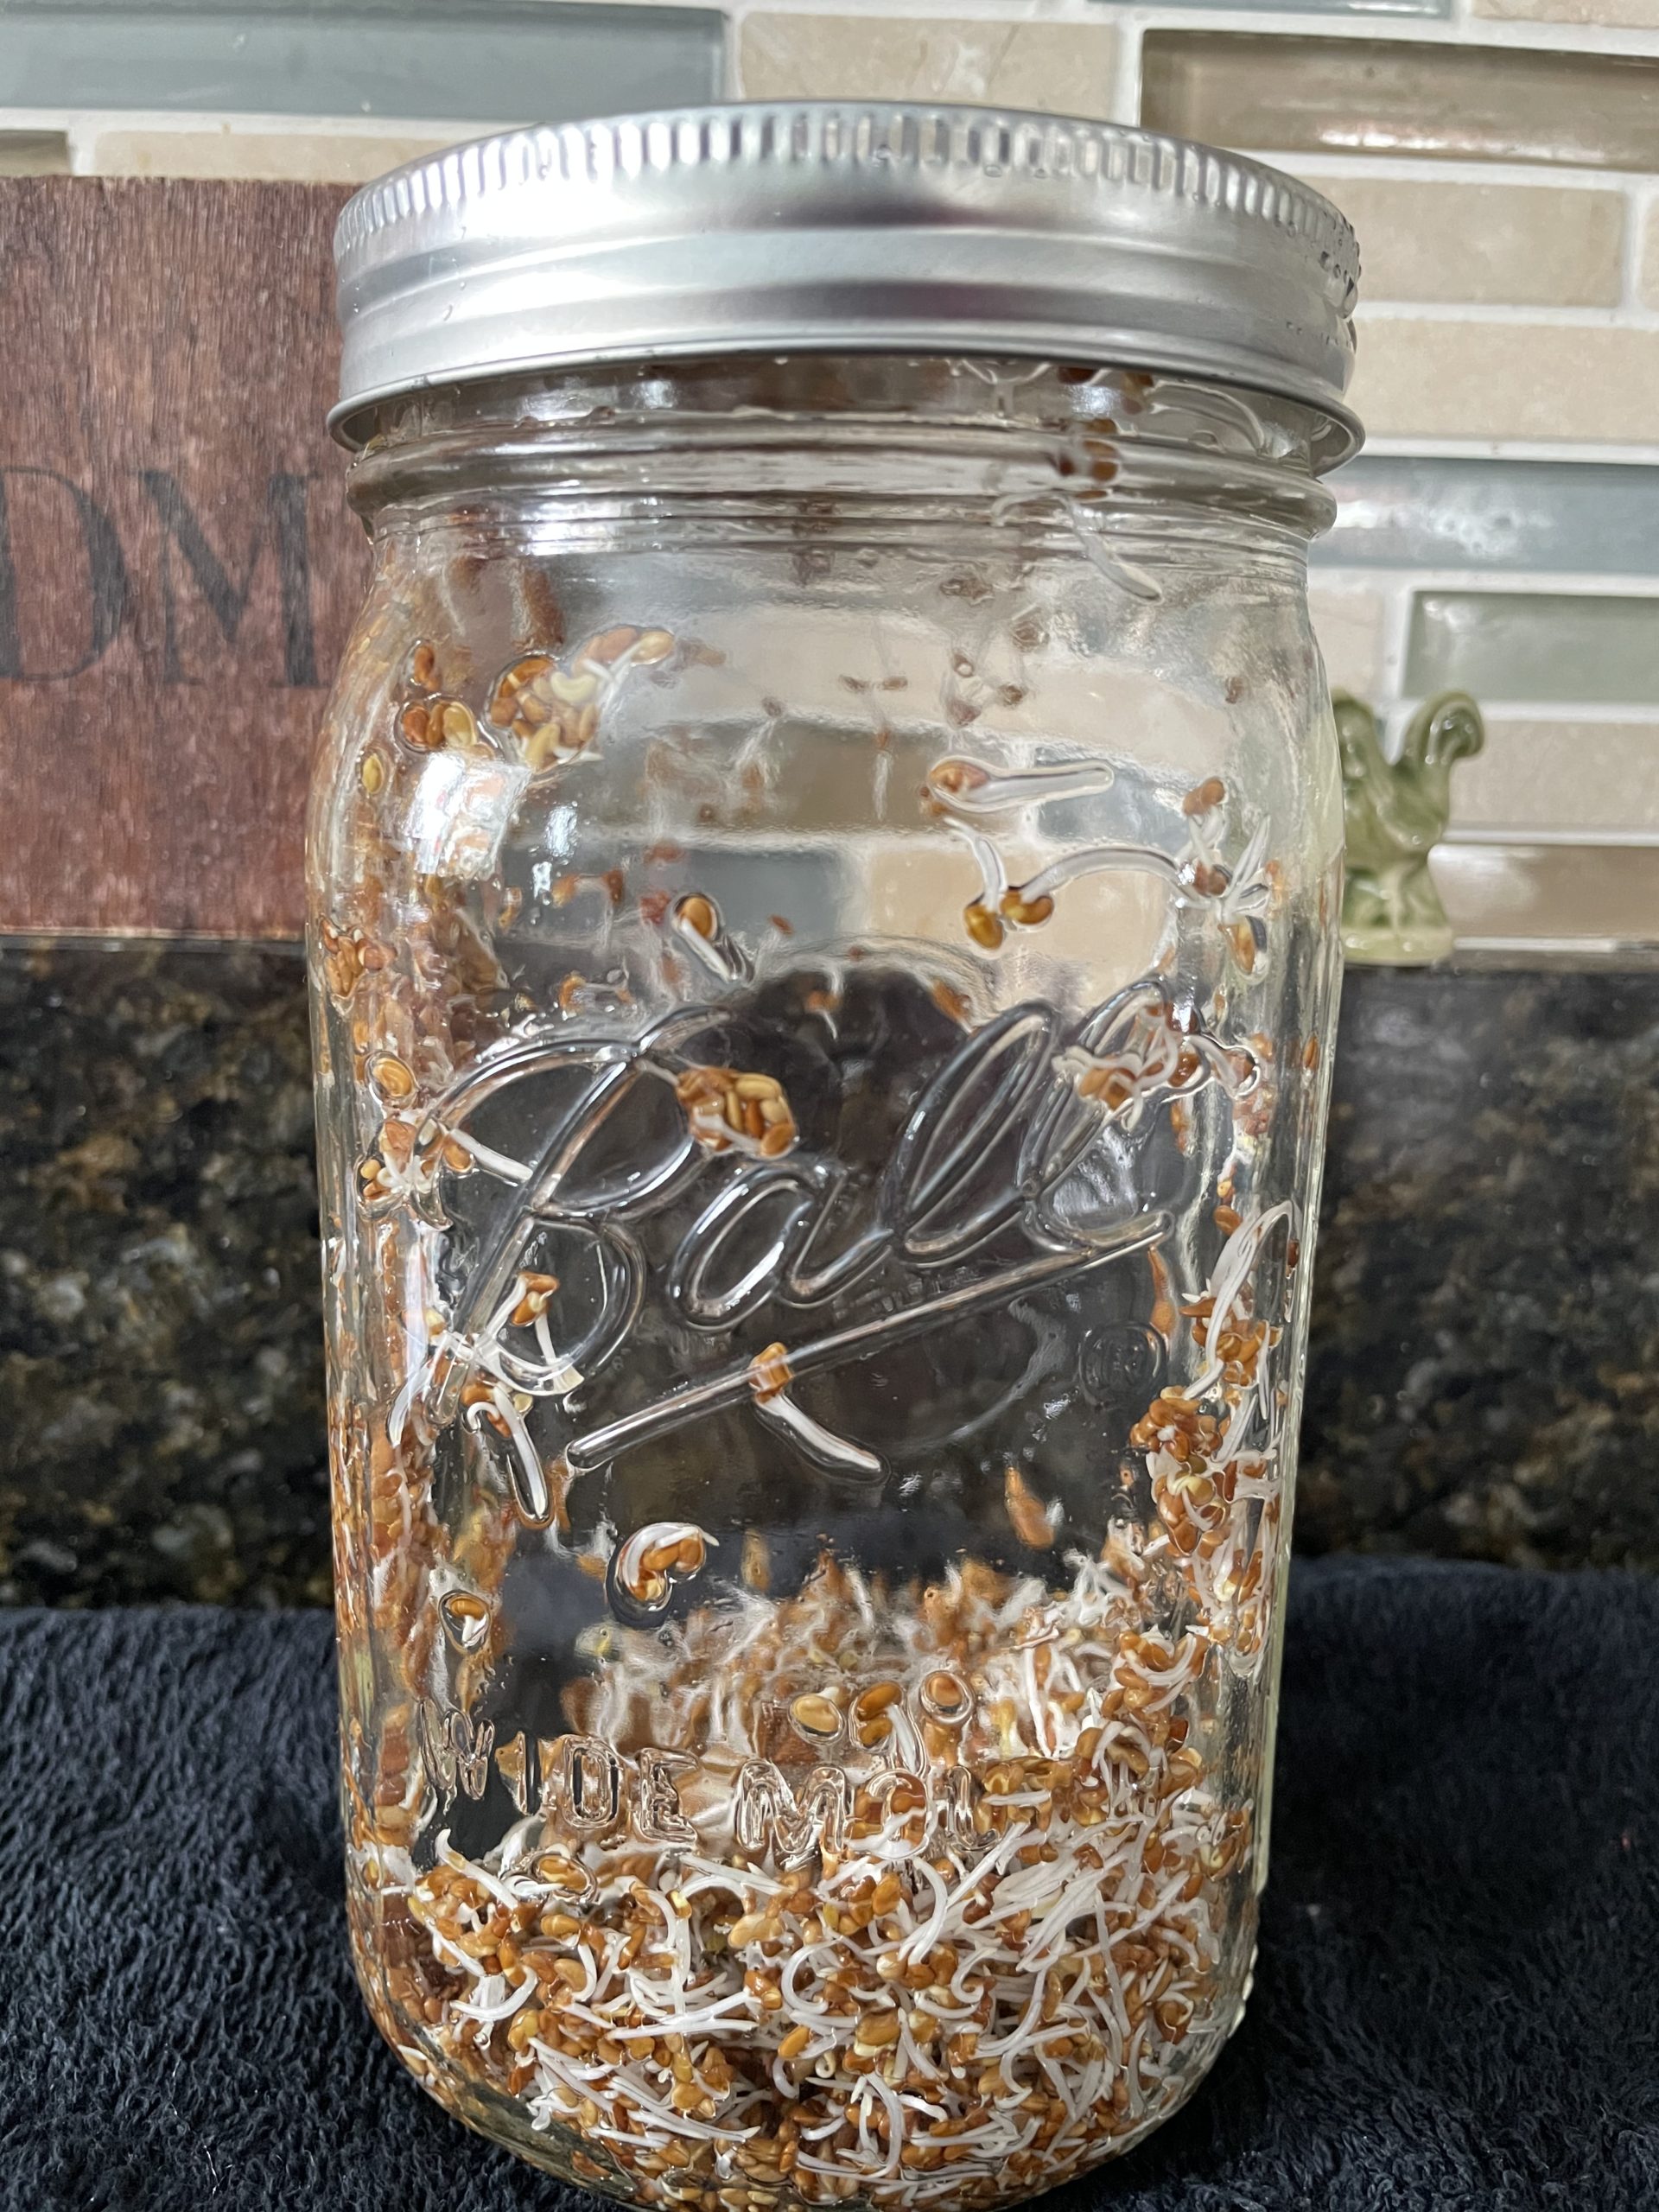 Sprouting in a jar